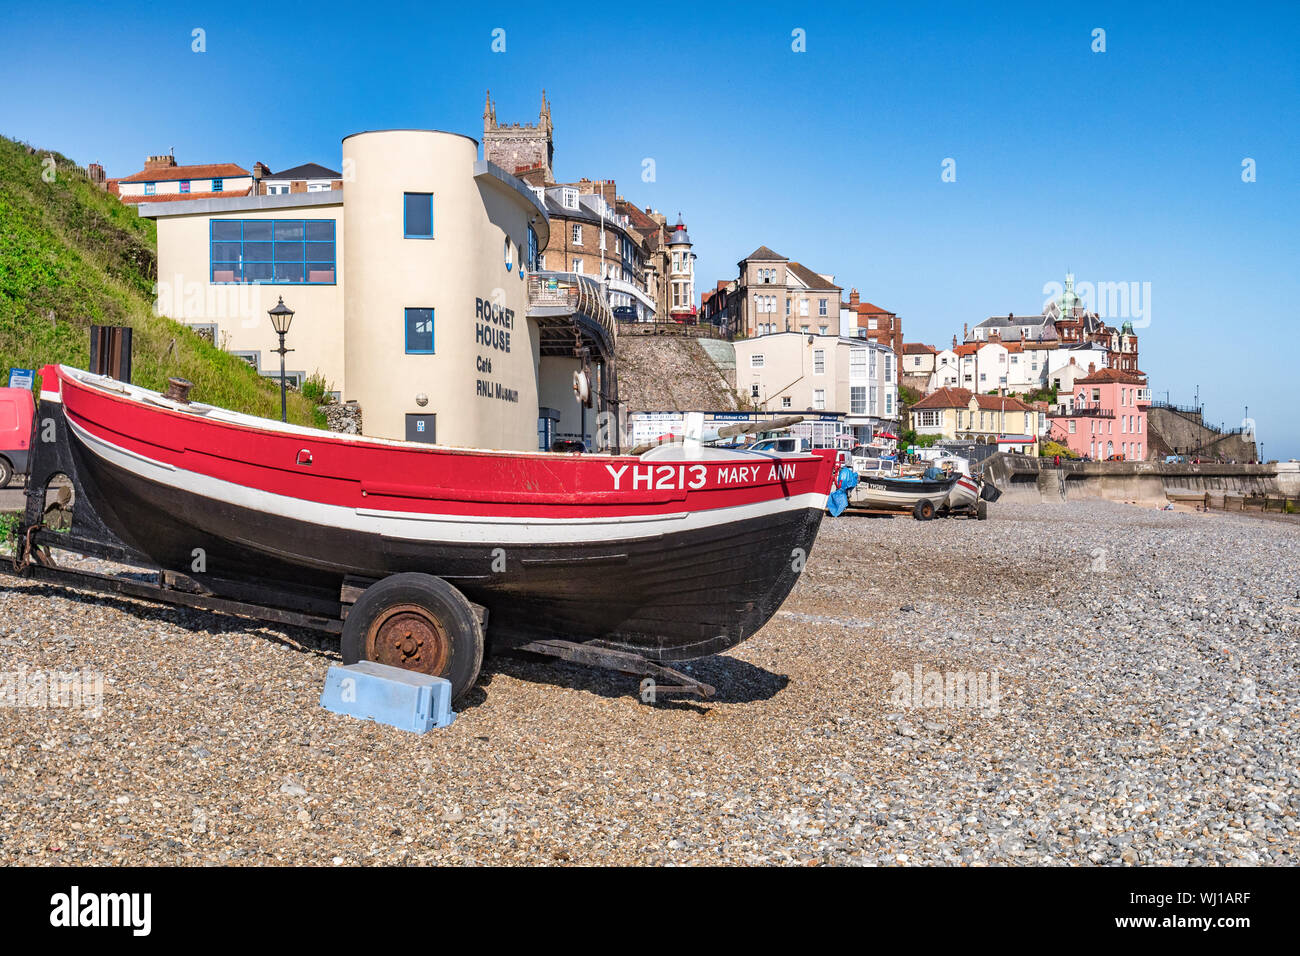 30 June 2019: Cromer, Norfolk, UK - The beach at Cromer, Norfolk, with boats on trailer and the RNLI Museum. Stock Photo